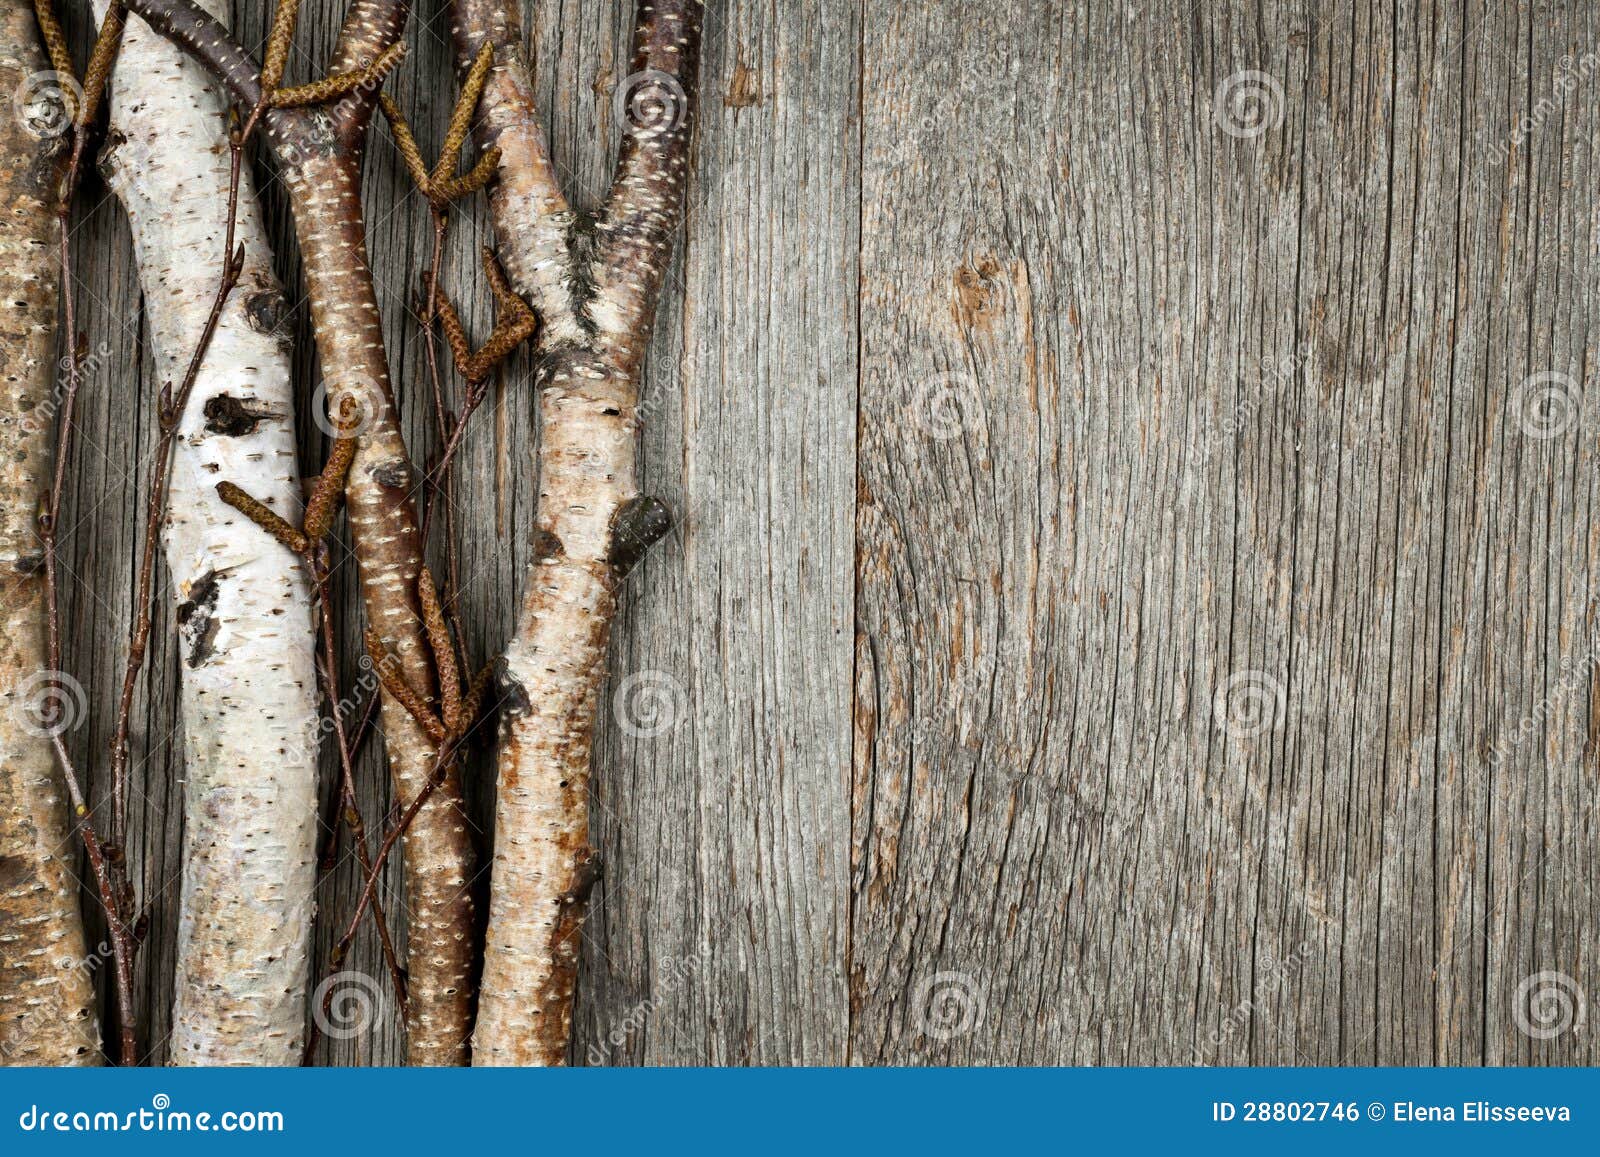 Birch Branches Background Royalty Free Stock Image - Image 